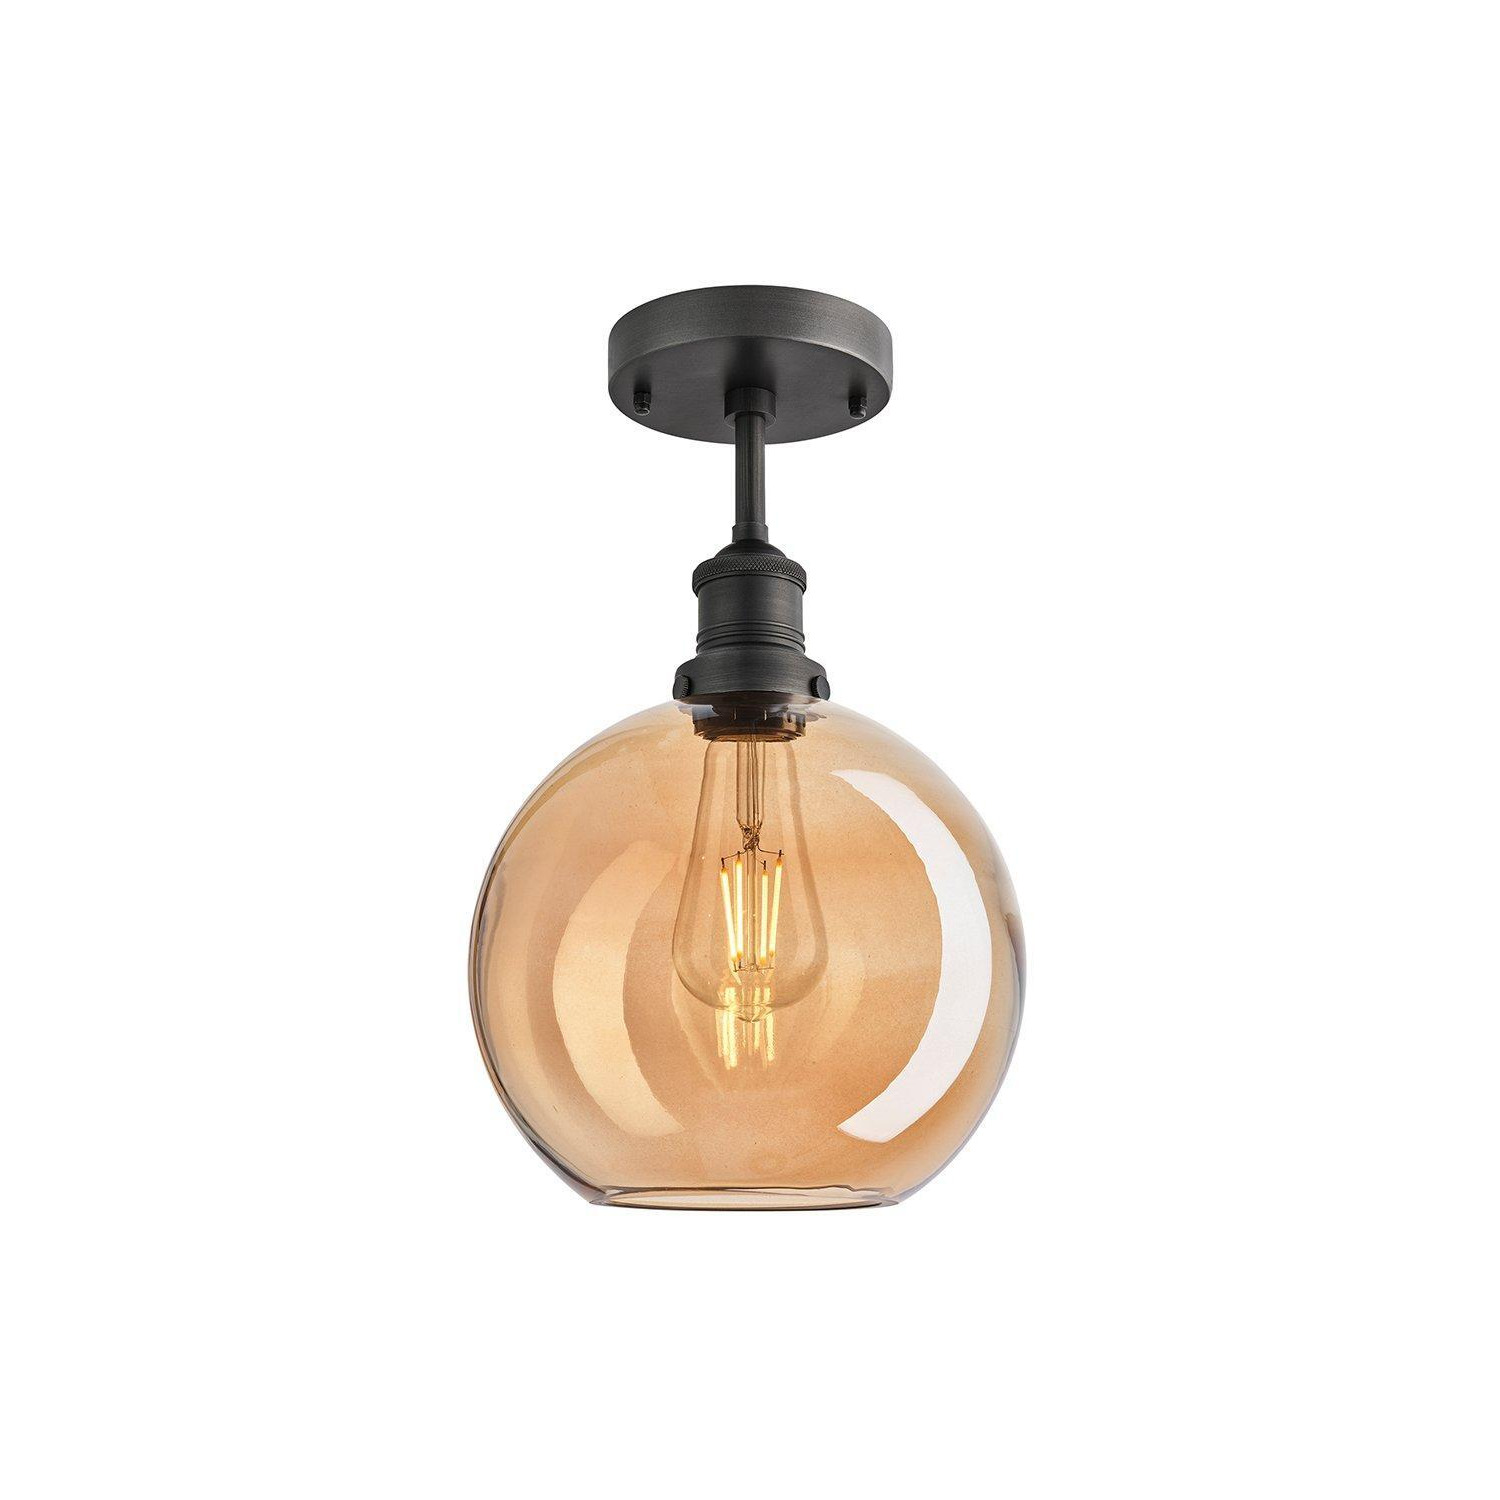 Brooklyn Tinted Glass Globe Flush Mount, 9 Inch, Amber, Pewter Holder - image 1